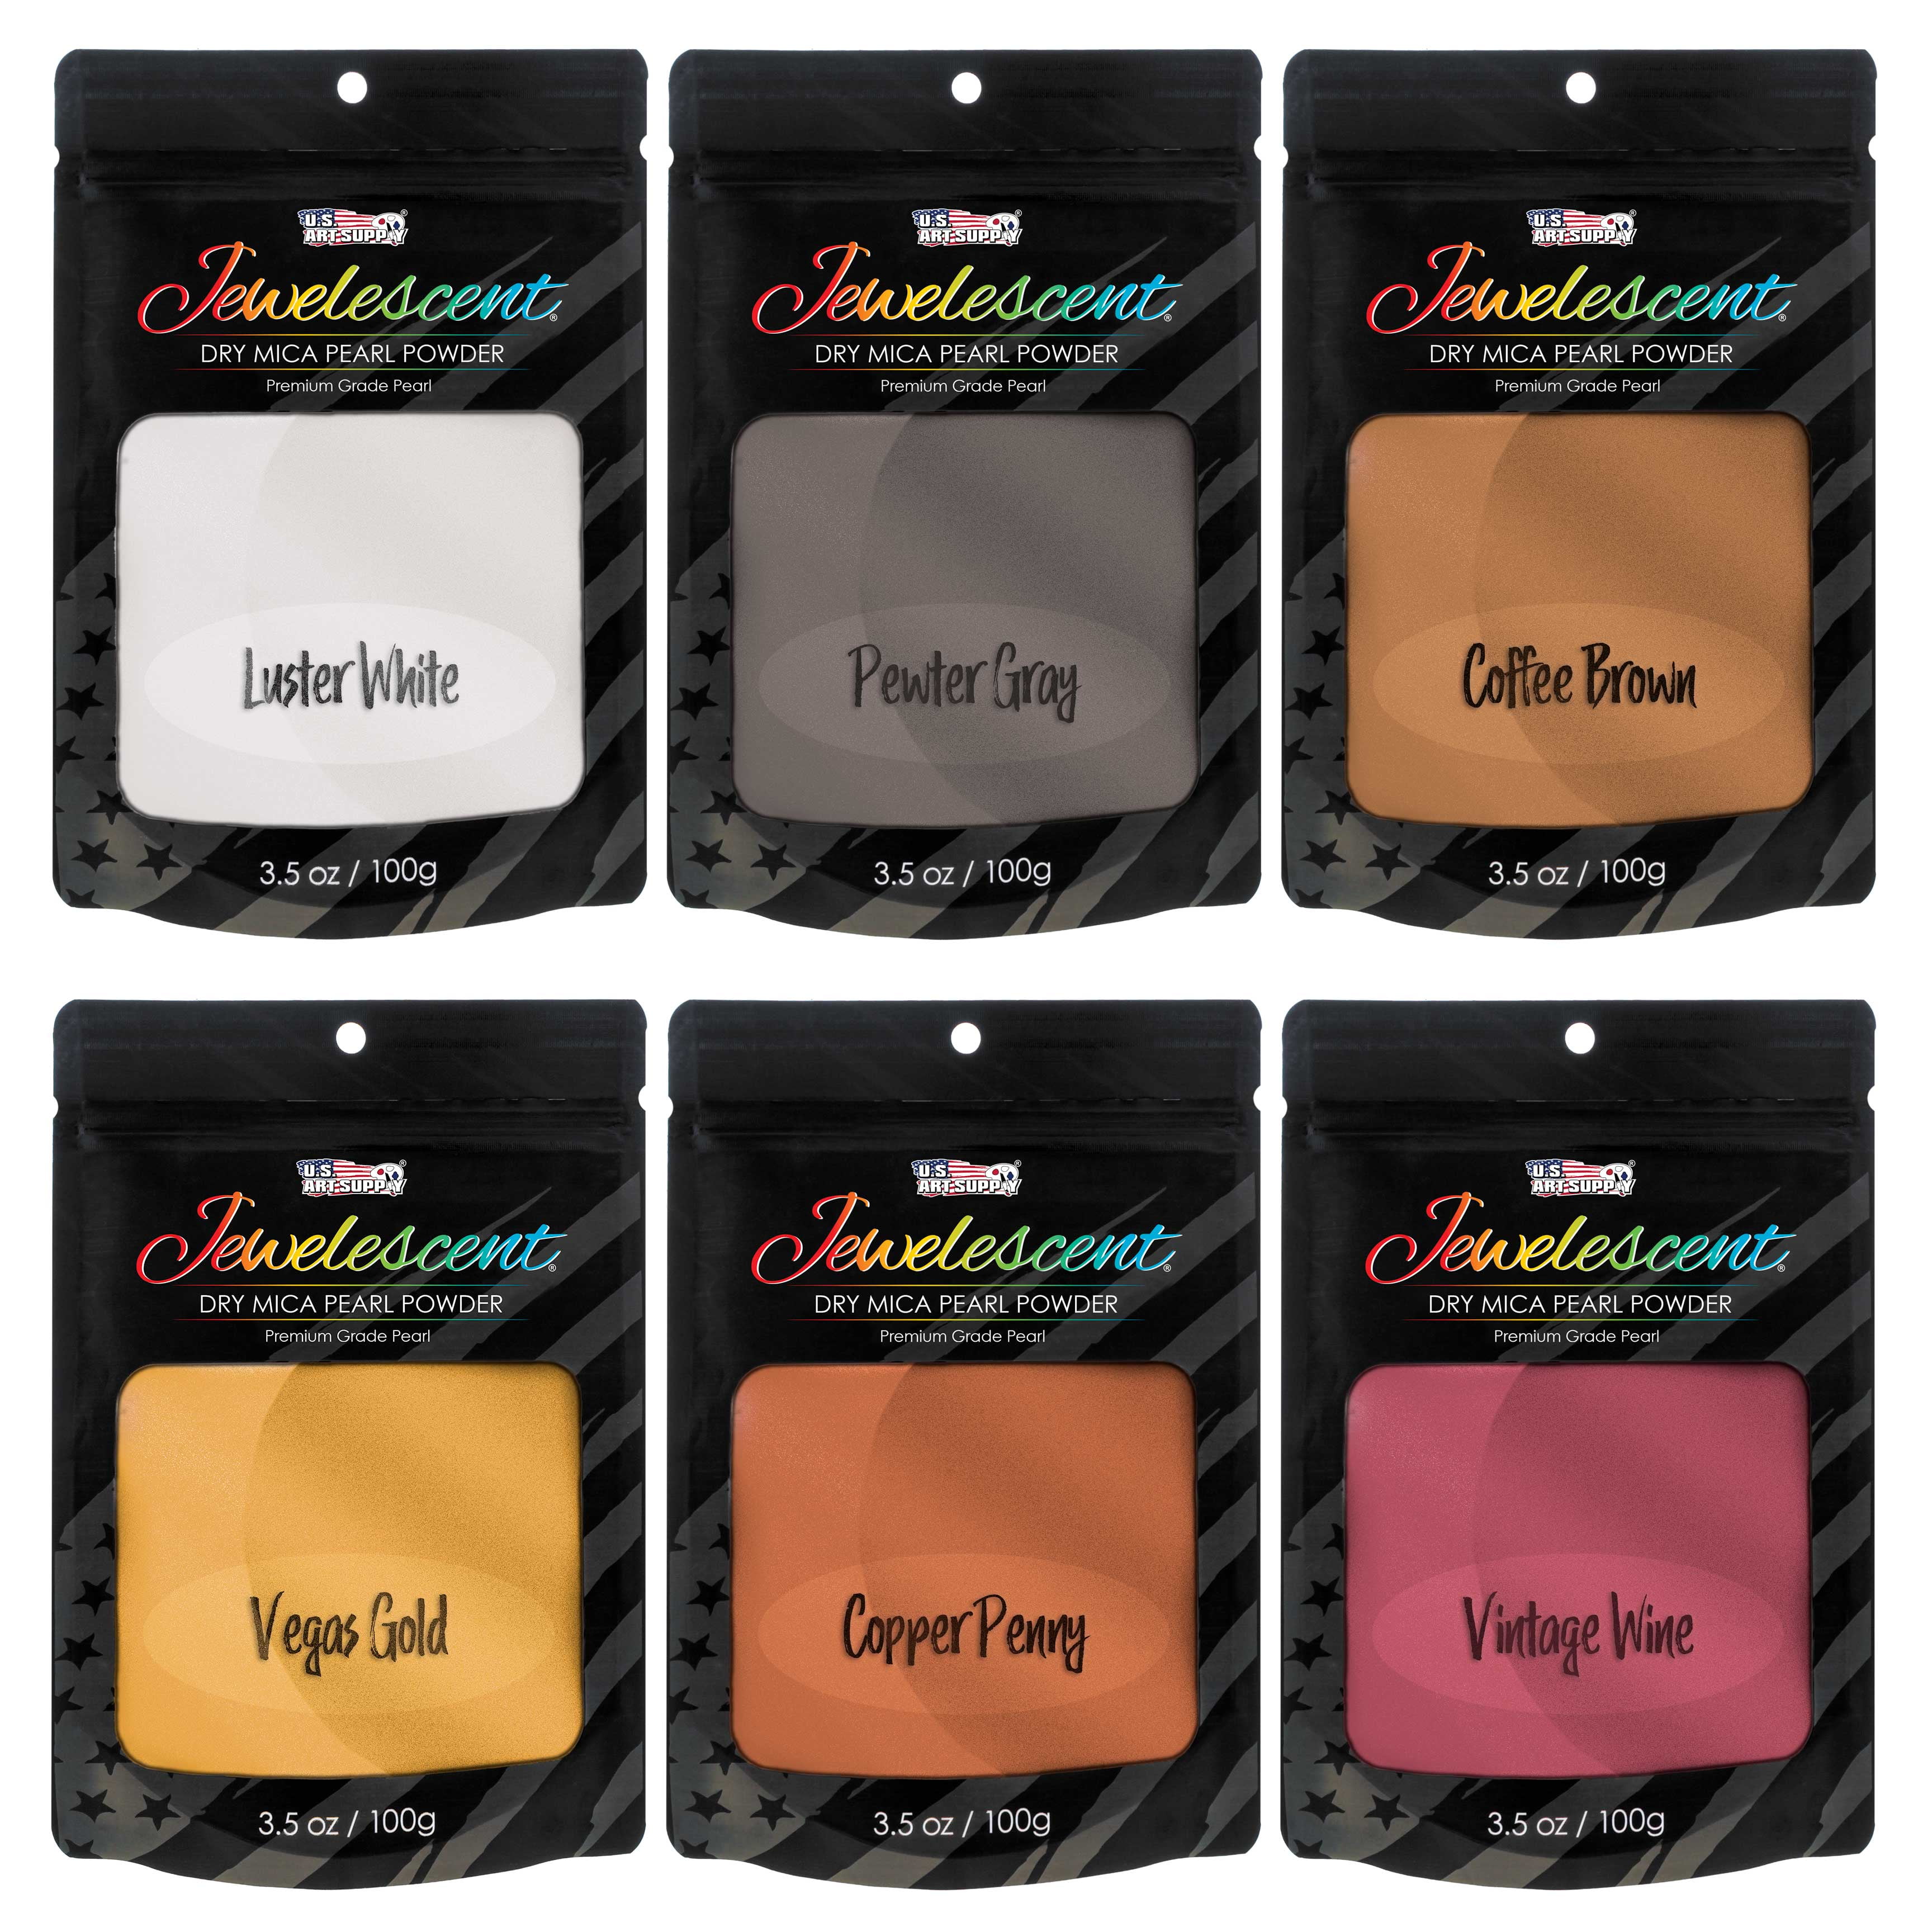 Eye Candy Pigments - Penny Copper